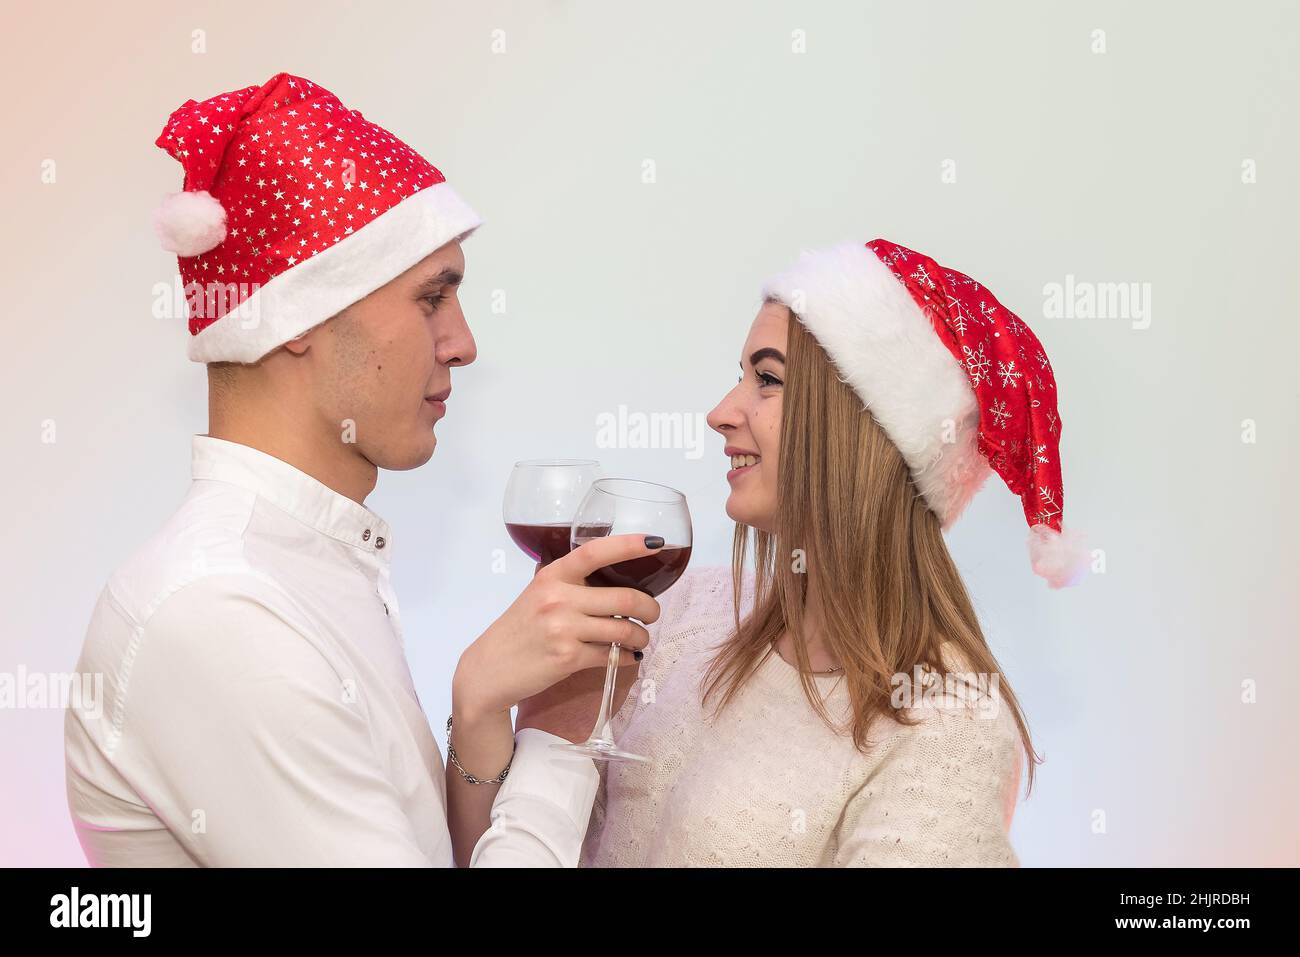 Young man pouring wine into glasses to his girlfriend. Valentine's celebration concept Stock Photo